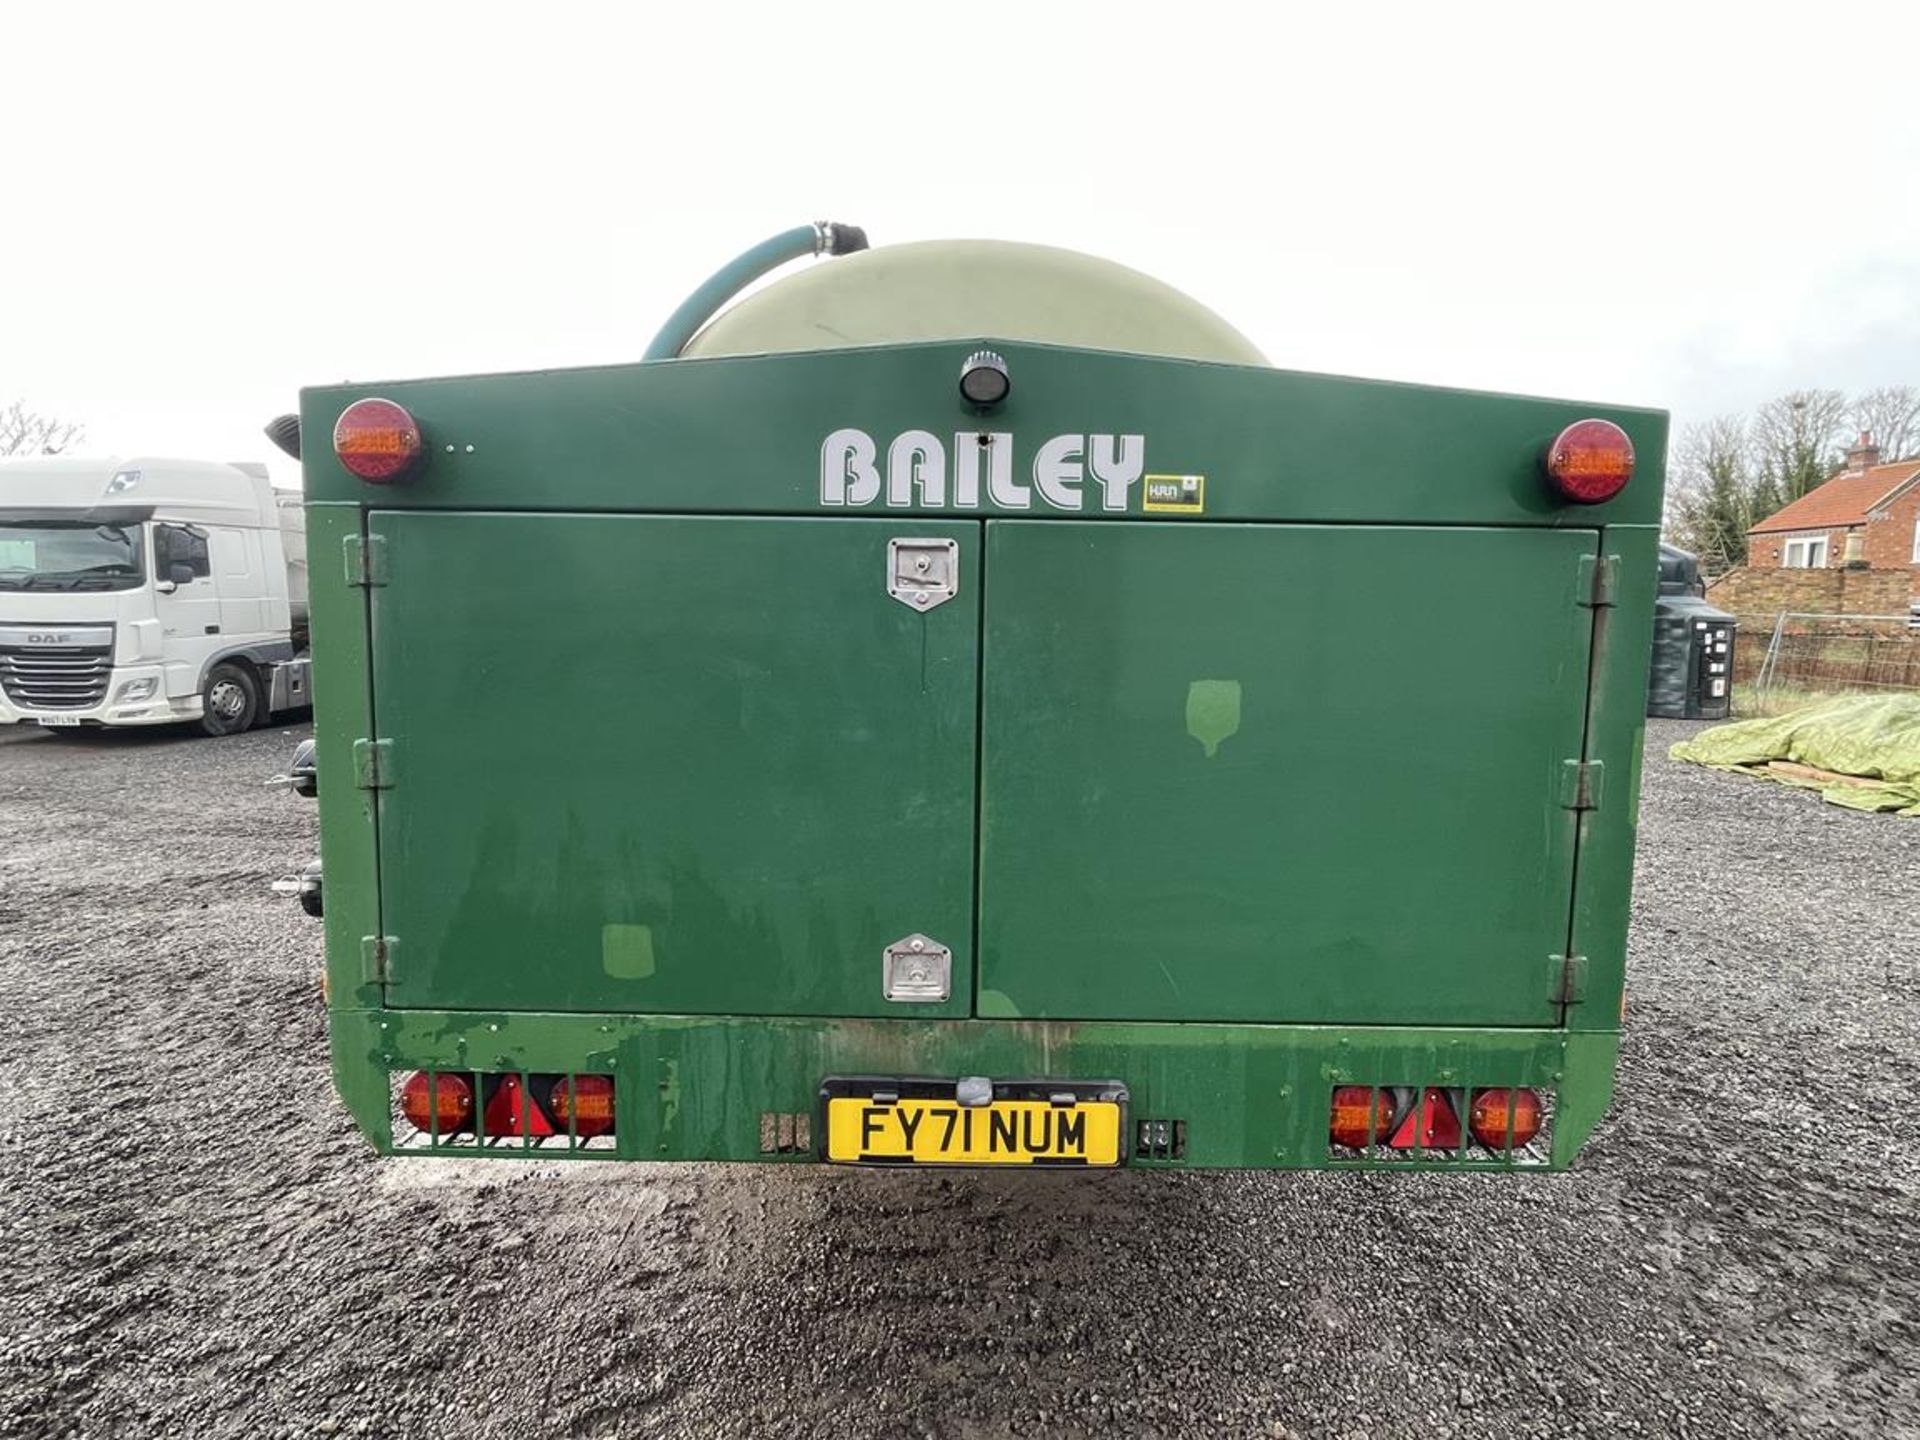 2018 Bailey 15,000 Litre Water Bowser Double Axle Fibreglass Trailer S/No. 1702316, Commercial - Image 3 of 10